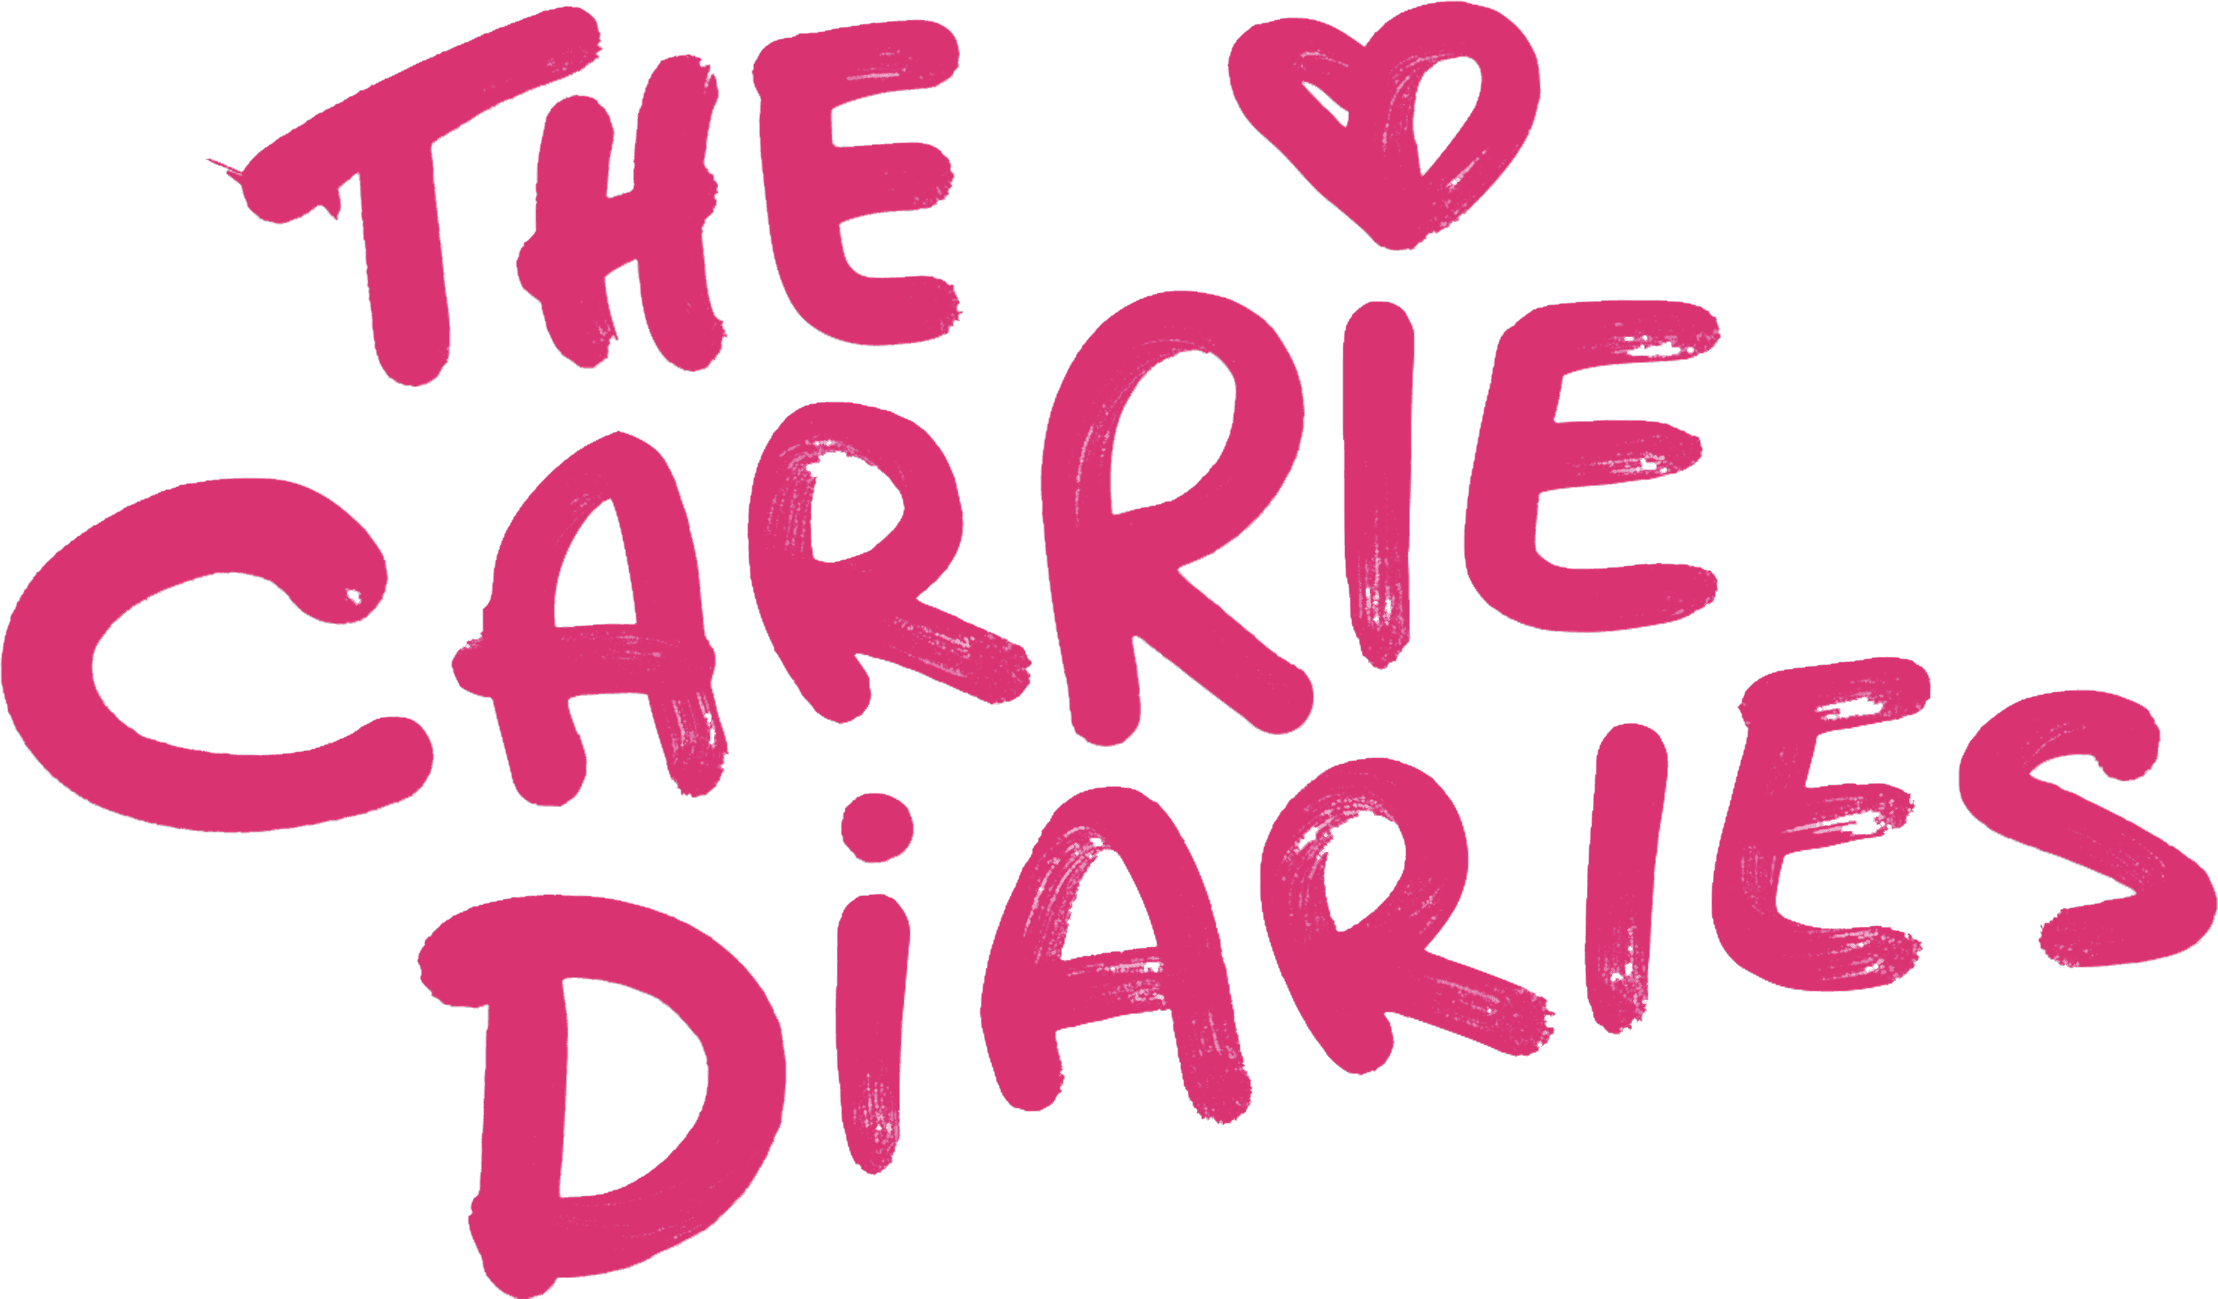 The Carrie Diaries logo